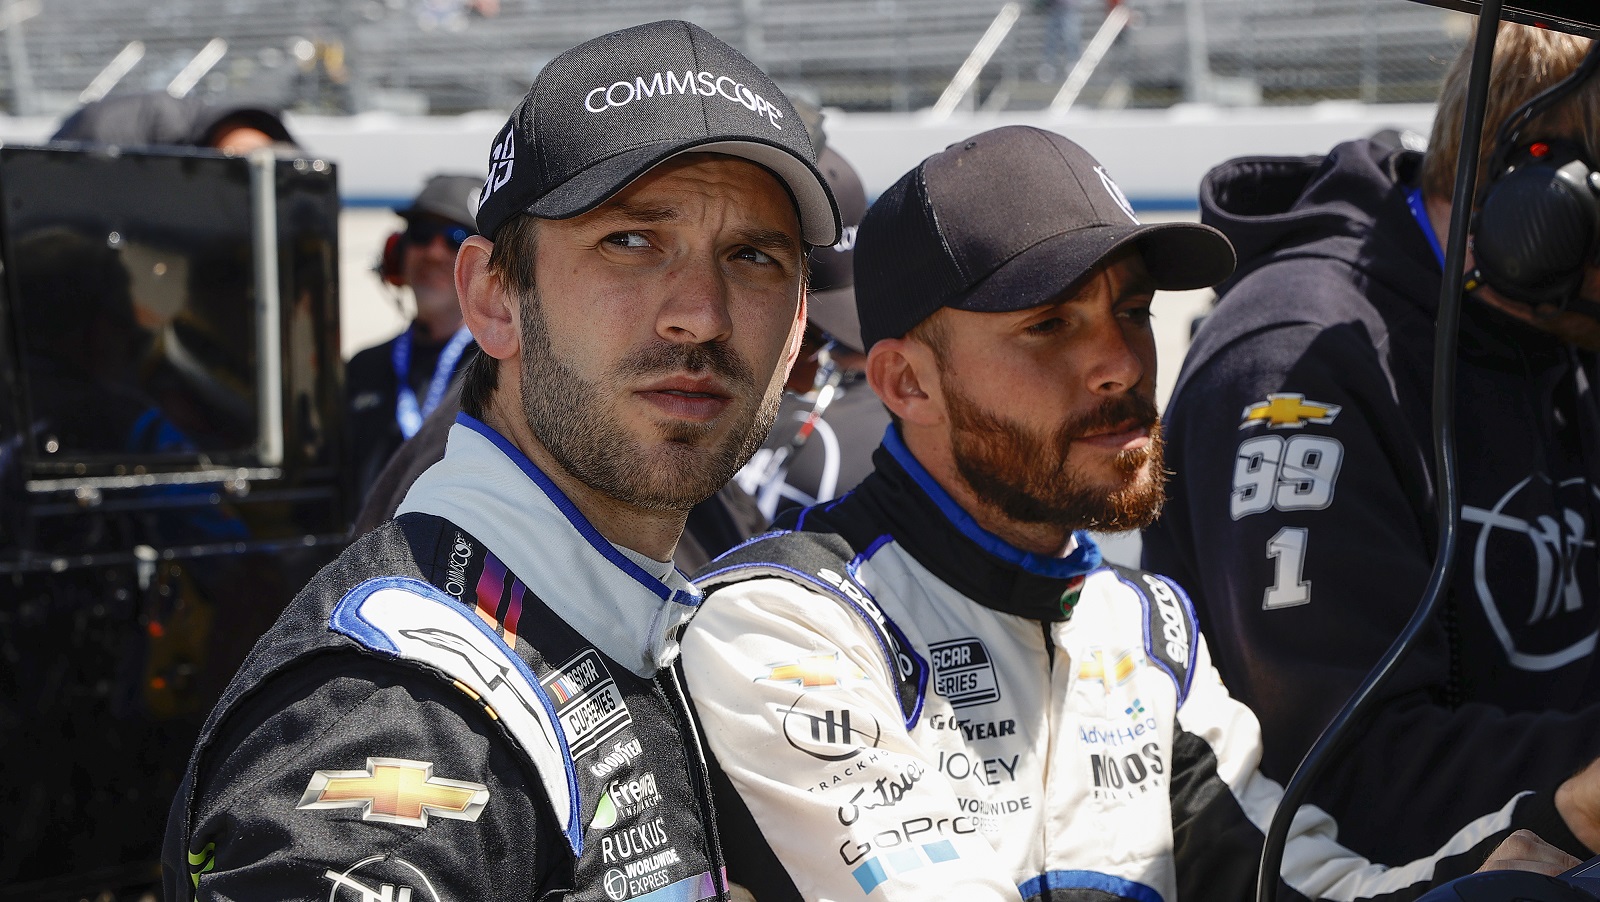 Daniel Suarez and Ross Chastain of Trackhouse Racing wait on the grid during qualifying for the DuraMAX Drydene 400 at Dover Motor Speedway on April 30, 2022. |  Tim Nwachukwu/Getty Images